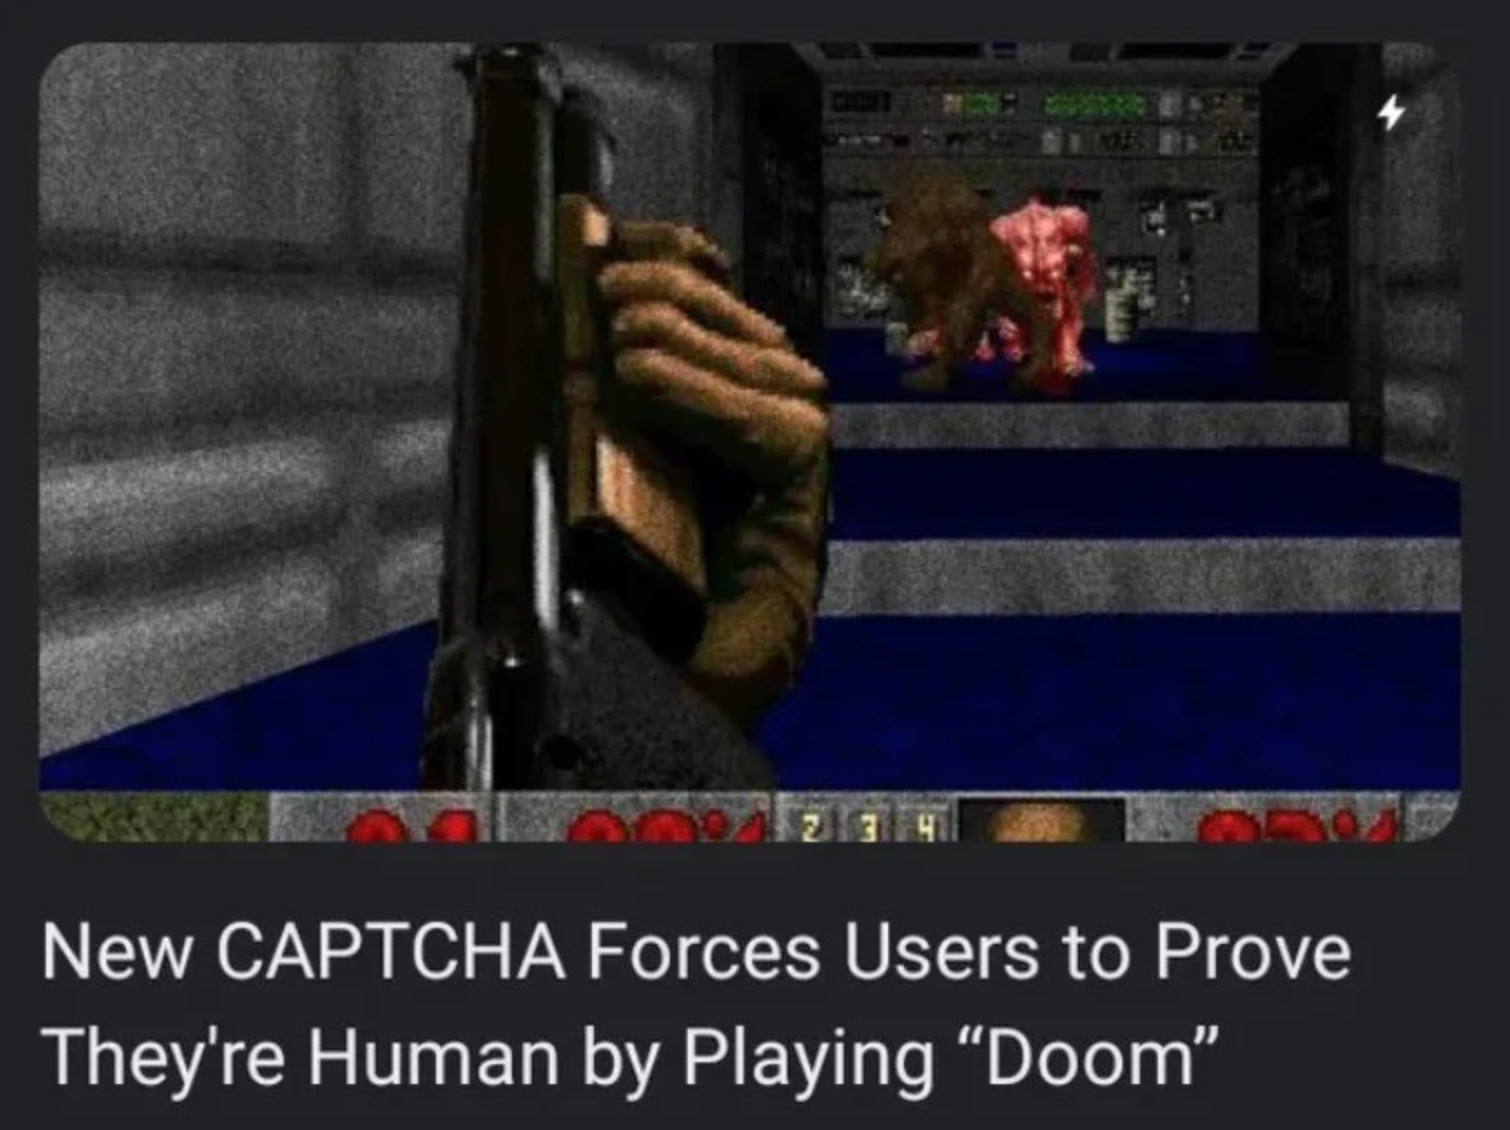 funny gaming memes - games - New Captcha Forces Users to Prove They're Human by Playing Doom"